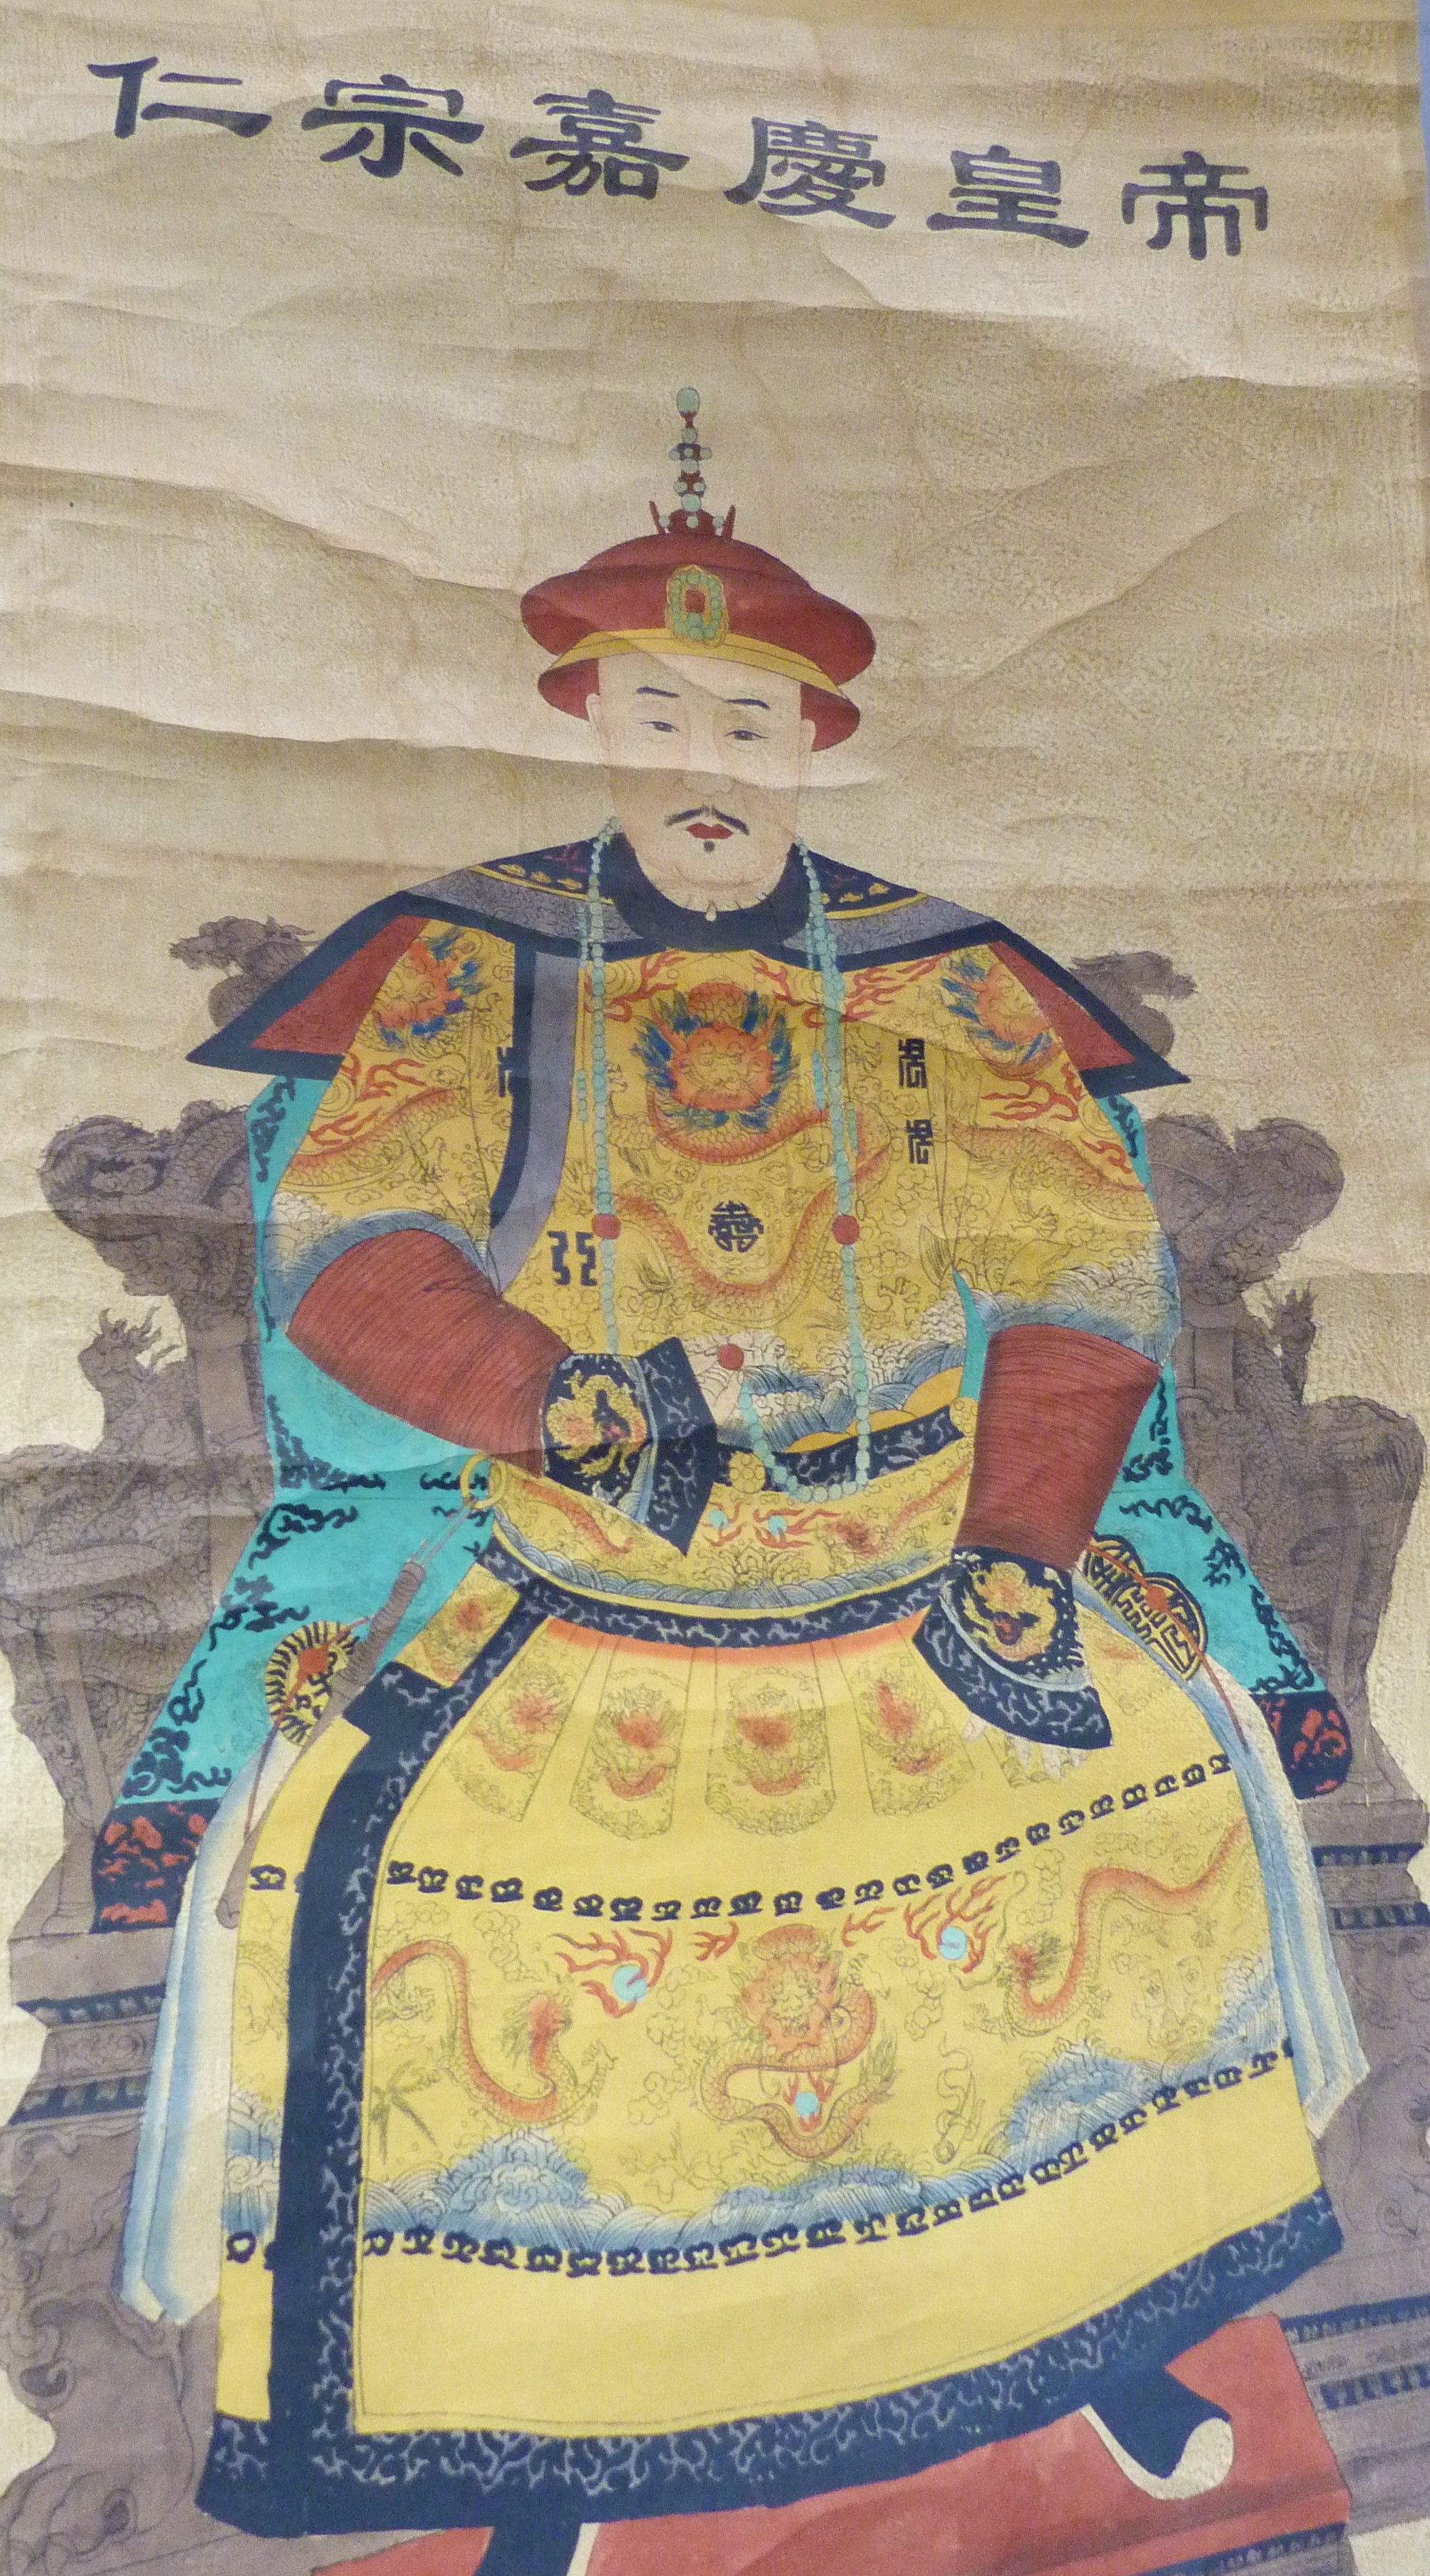 A Japanese scroll printed and painted with a portrait of an Emperor in fine robes - Image 2 of 3